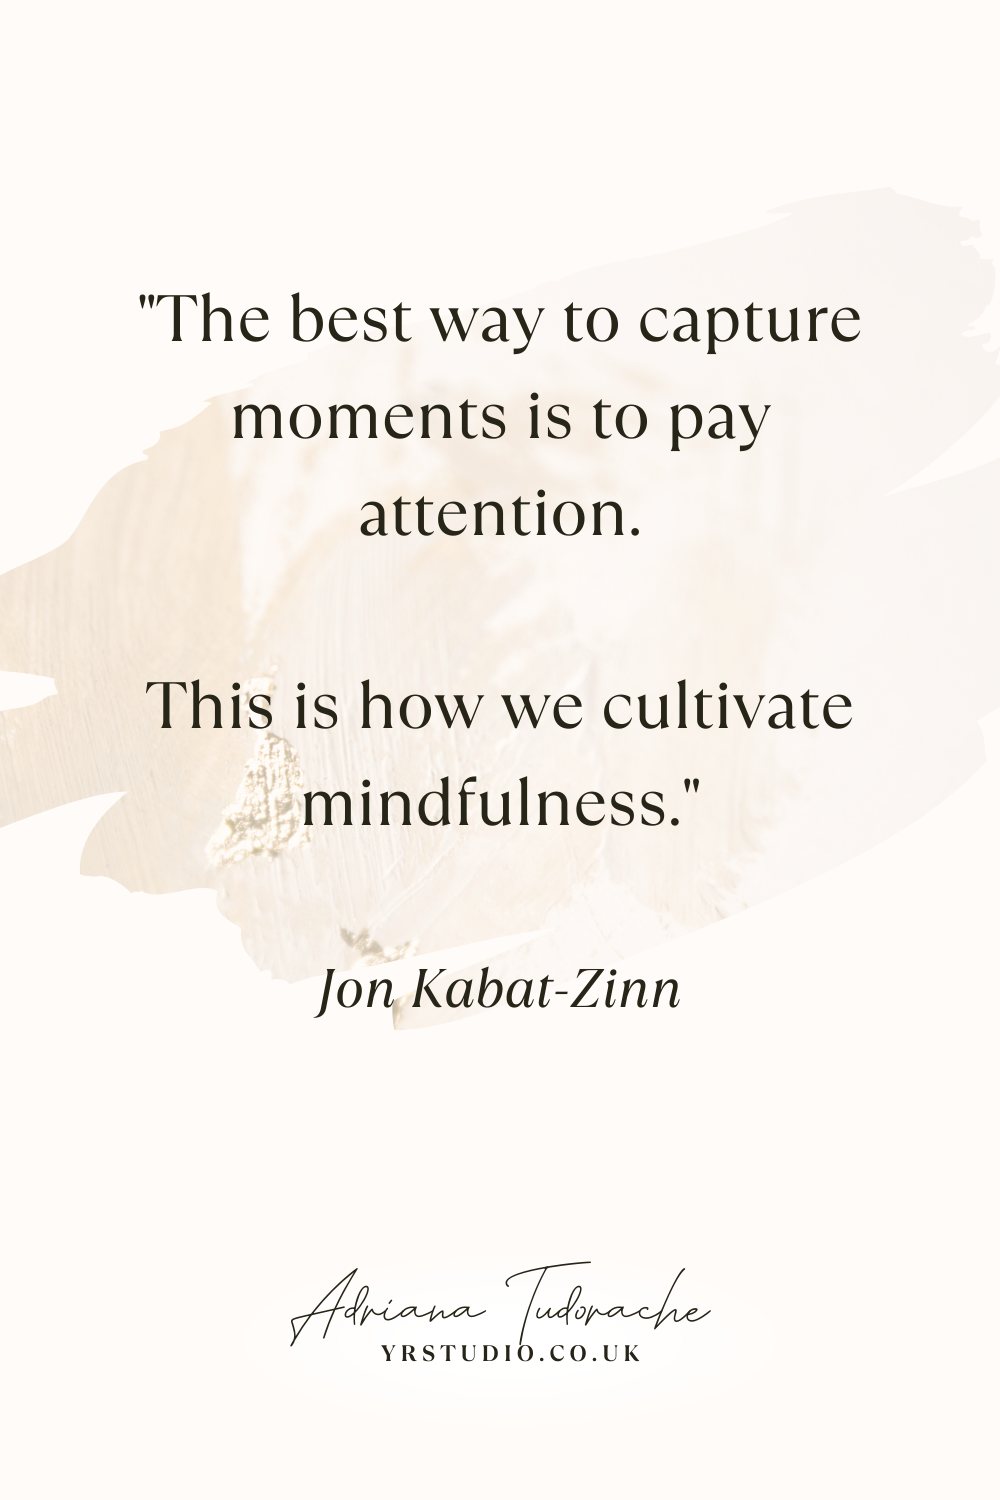 "The best way to capture moments is to pay attention. This is how we cultivate mindfulness." - Jon Kabat-Zinn